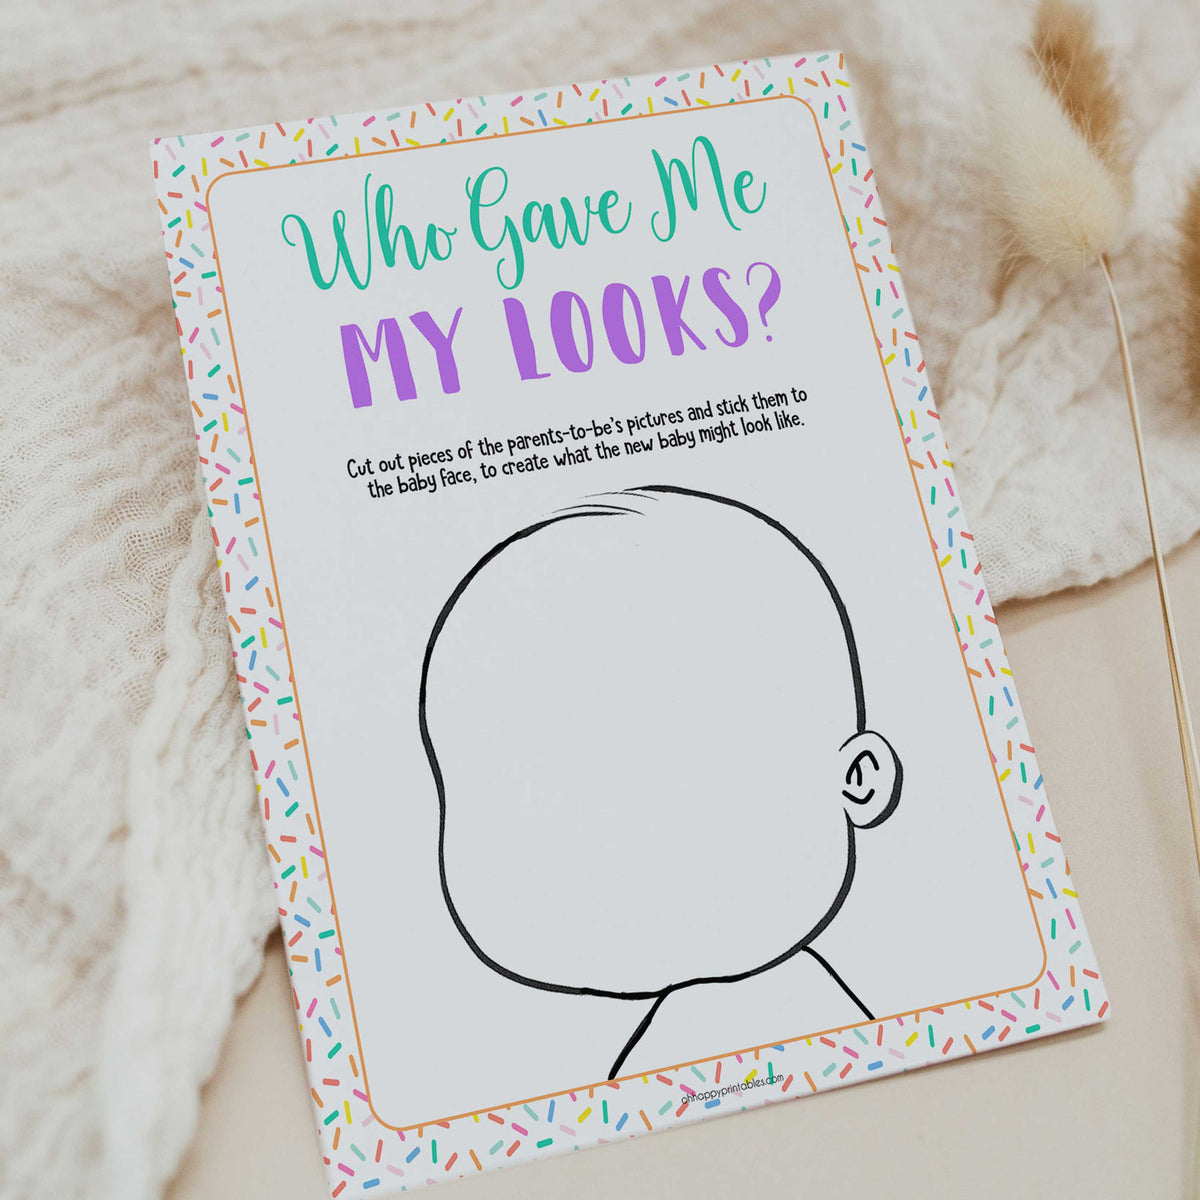 who gave me my looks, baby looks game,  Printable baby shower games, baby sprinkle fun baby games, baby shower games, fun baby shower ideas, top baby shower ideas, sprinkle shower baby shower, friends baby shower ideas